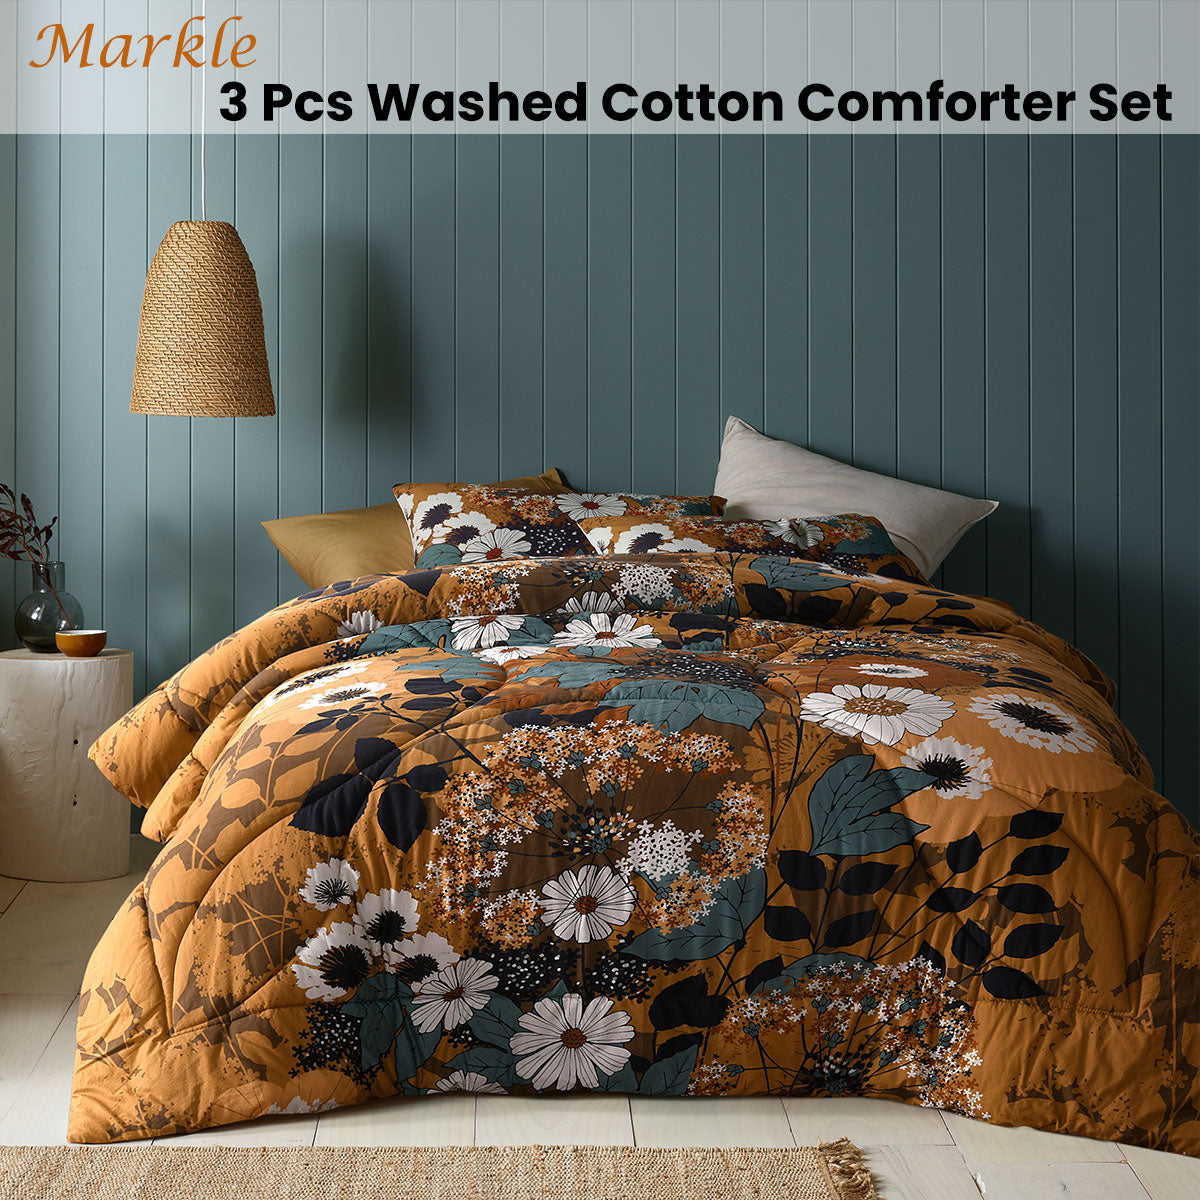 Accessorize Markle Washed Cotton Printed 3 Piece Comforter Set Queen